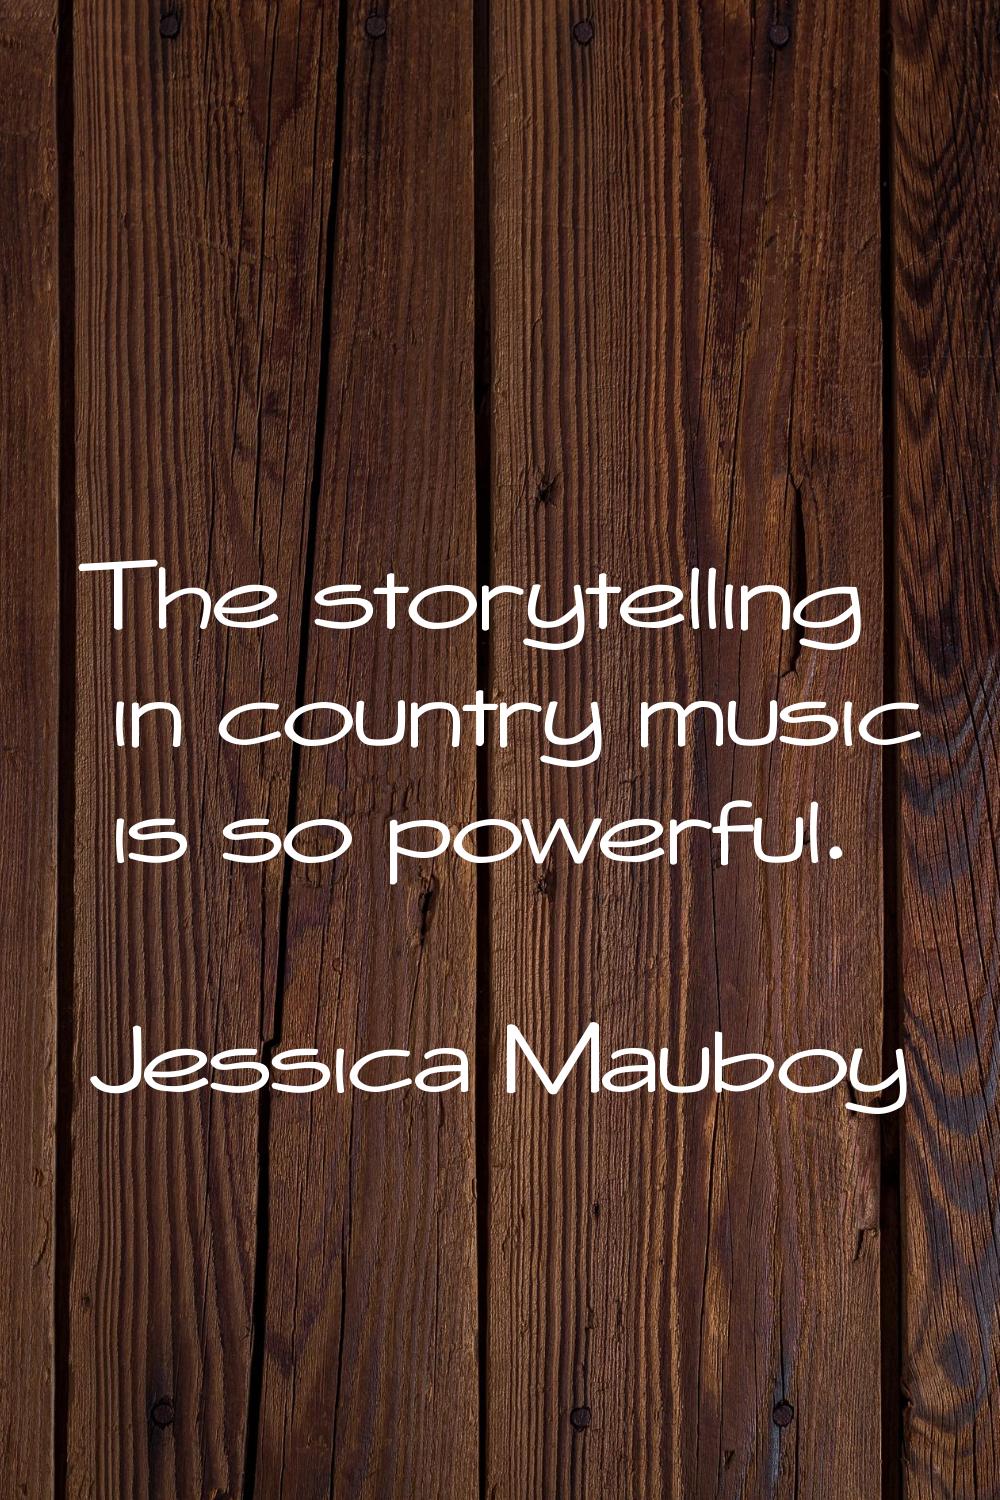 The storytelling in country music is so powerful.